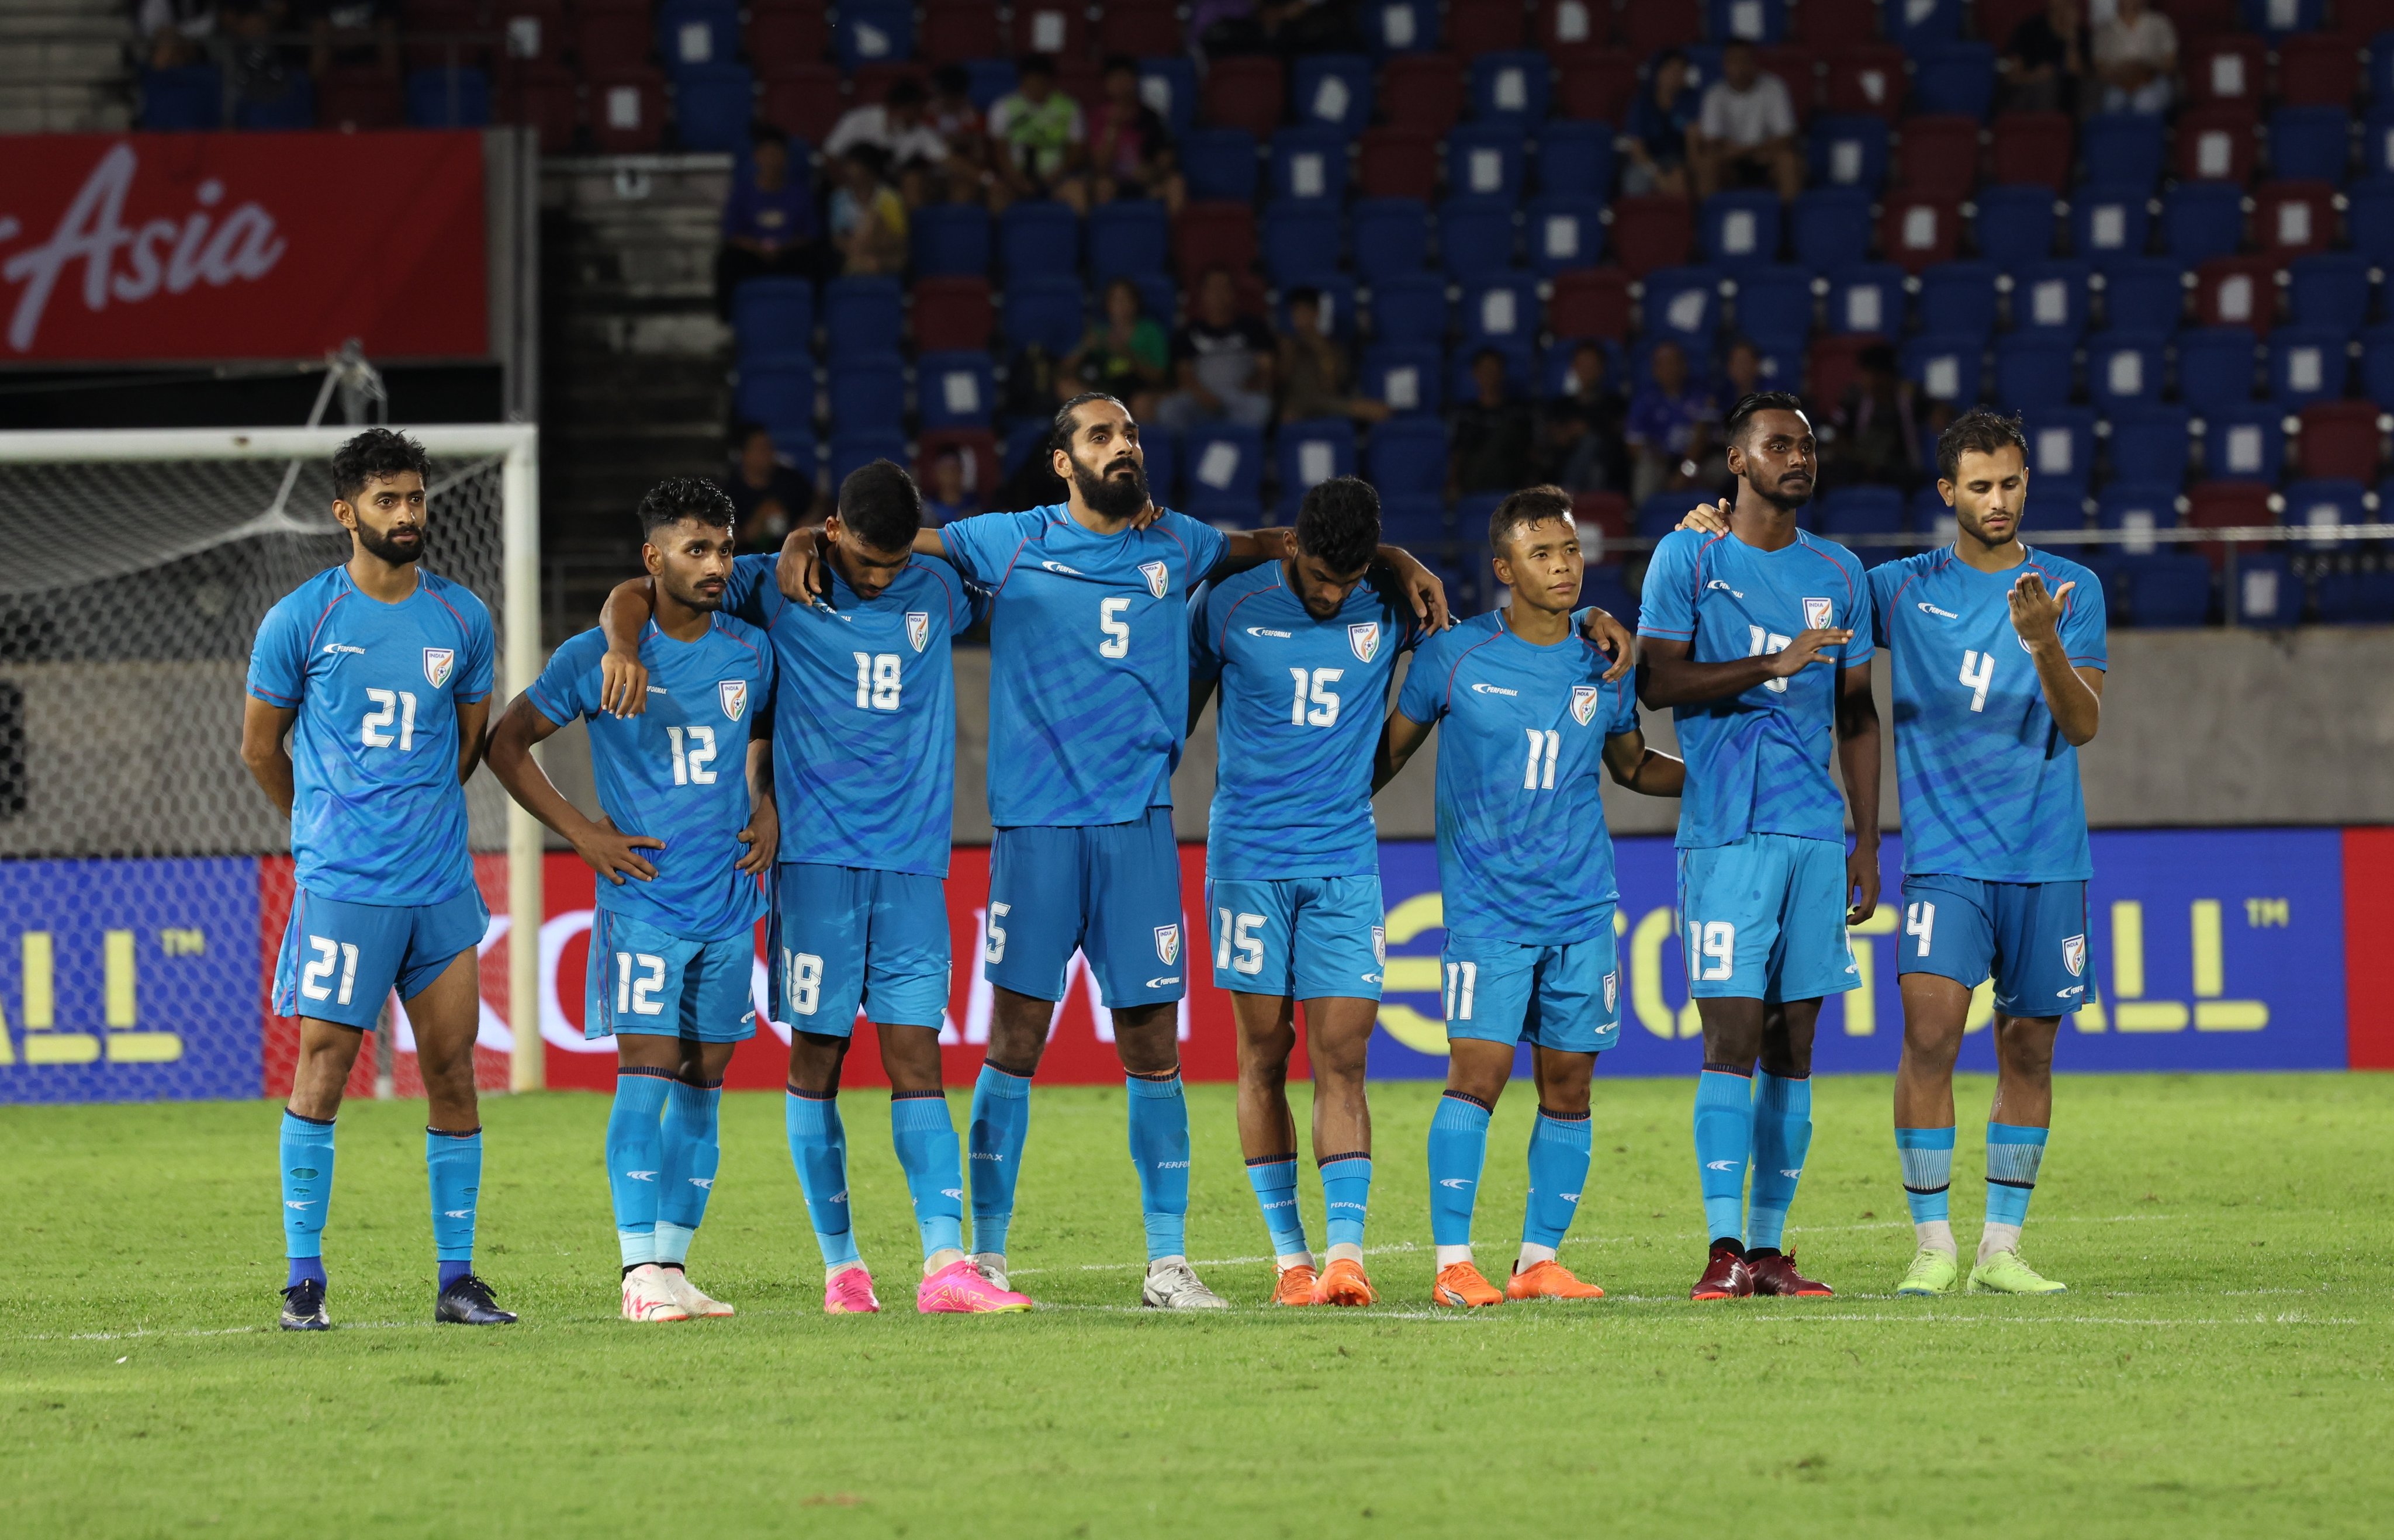  Sports Ministry releases surprising Indian Football Team for Asian Games 2023 with Gurpreet Singh Sandhu and Sandesh Jhigan in it